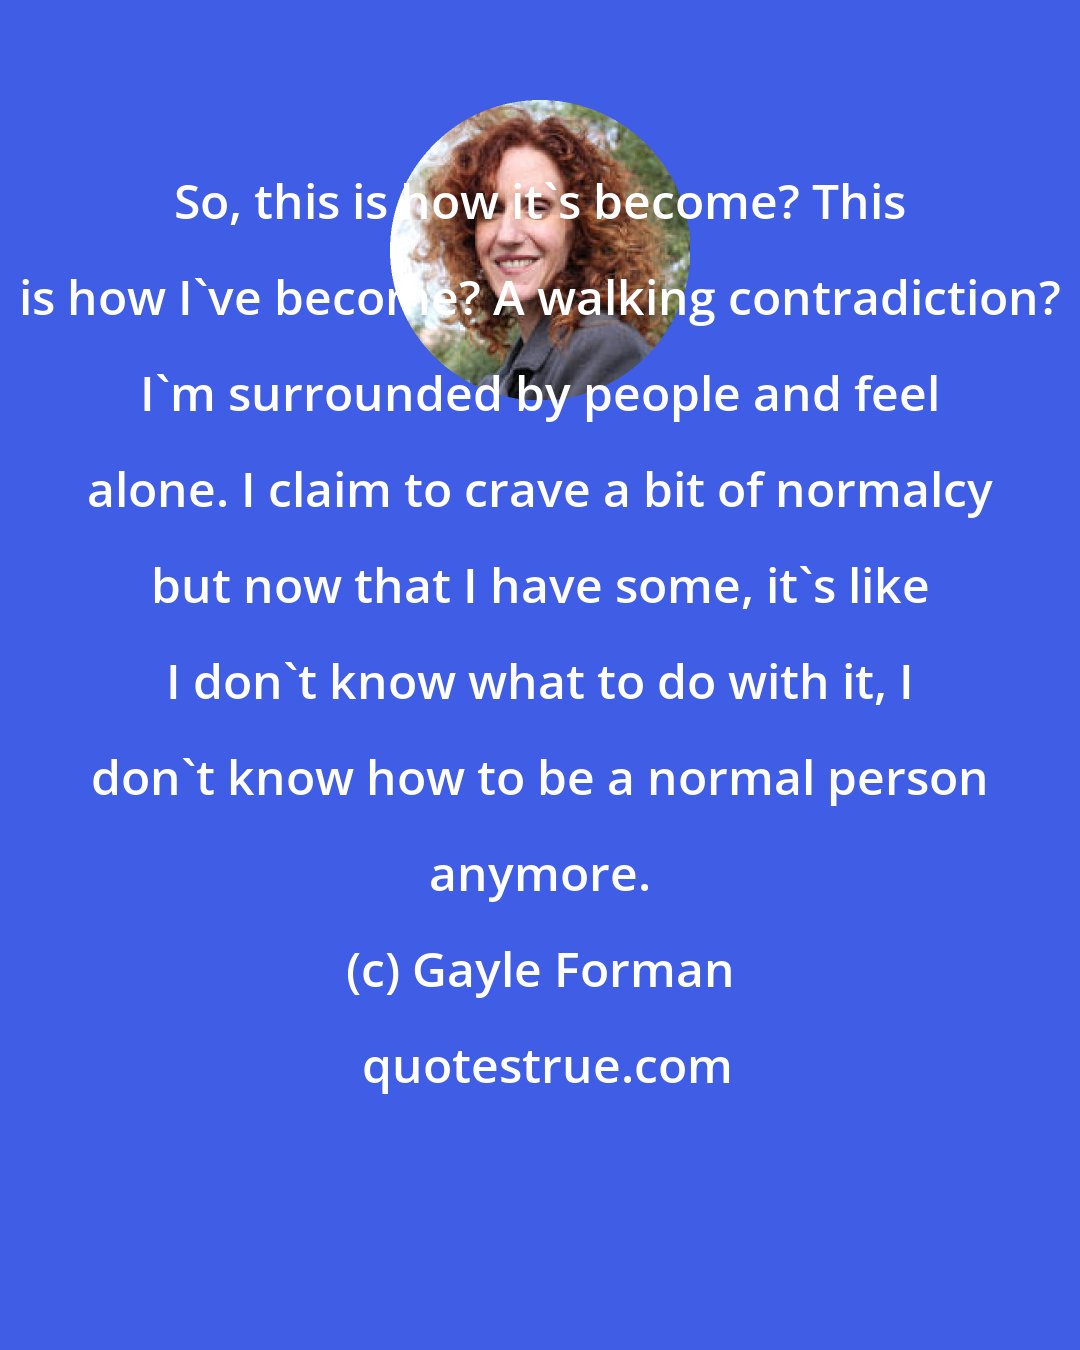 Gayle Forman: So, this is how it's become? This is how I've become? A walking contradiction? I'm surrounded by people and feel alone. I claim to crave a bit of normalcy but now that I have some, it's like I don't know what to do with it, I don't know how to be a normal person anymore.